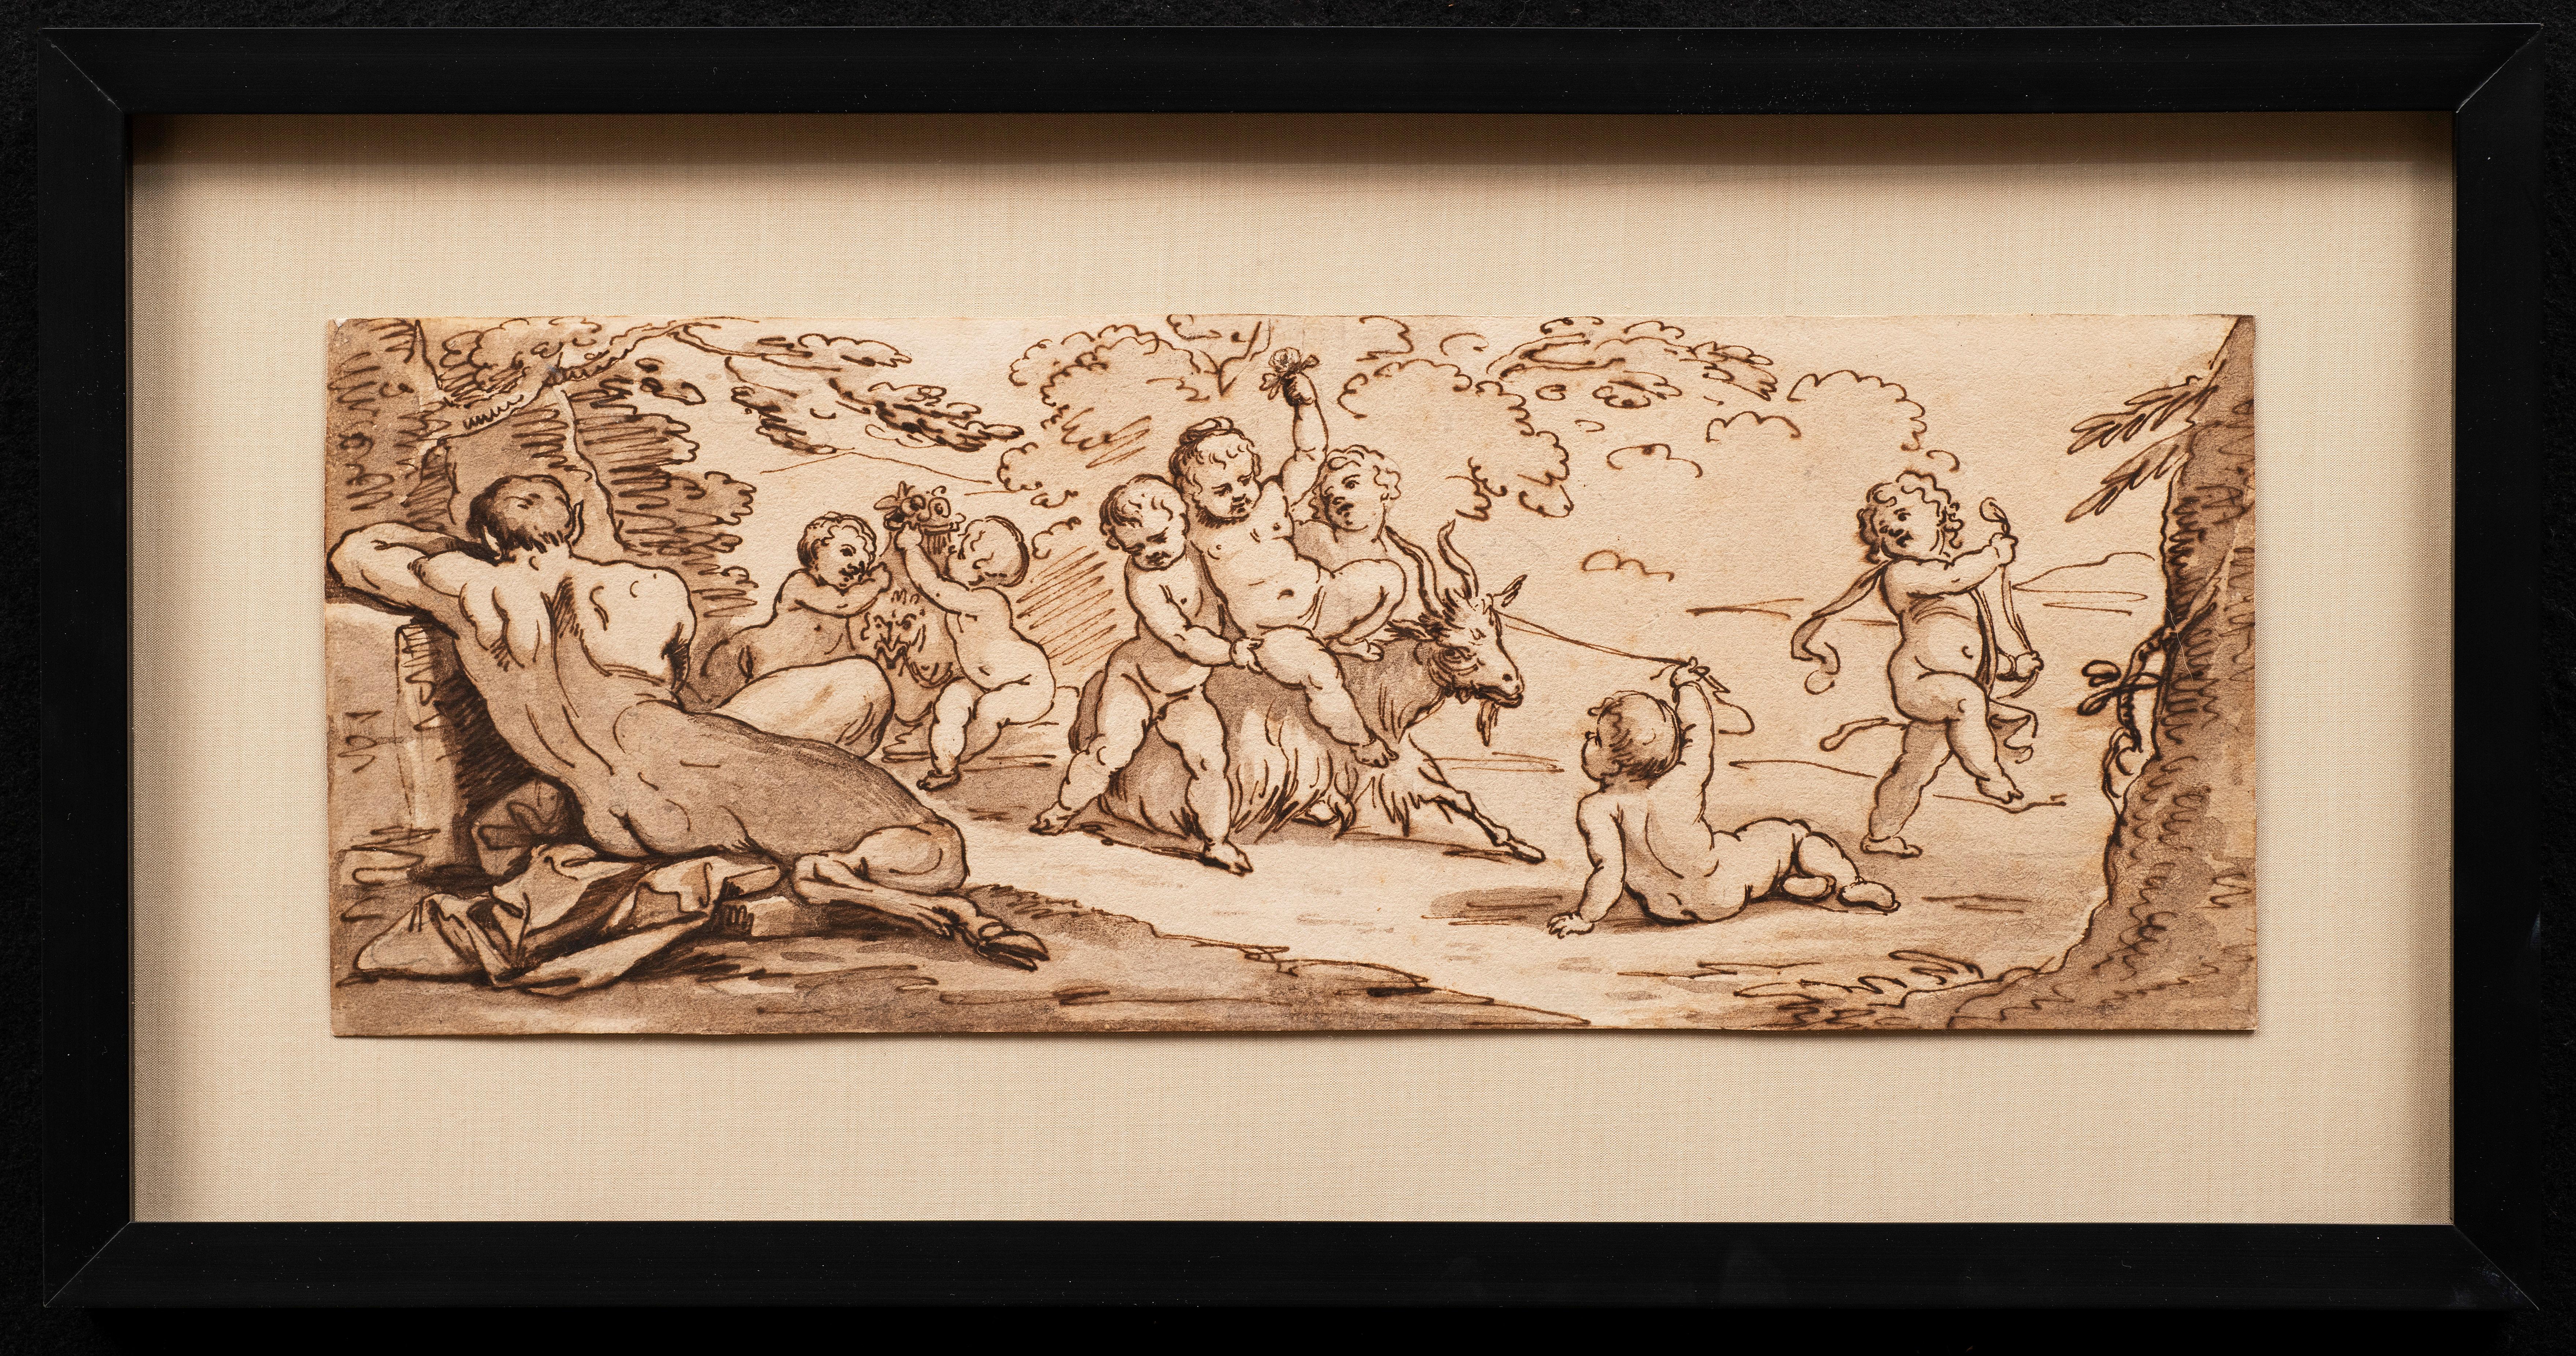 Unknown Nude Painting - Antique Italian School Late 17th - Early 18th "Cherubs (A)" Pen drawing of Putti